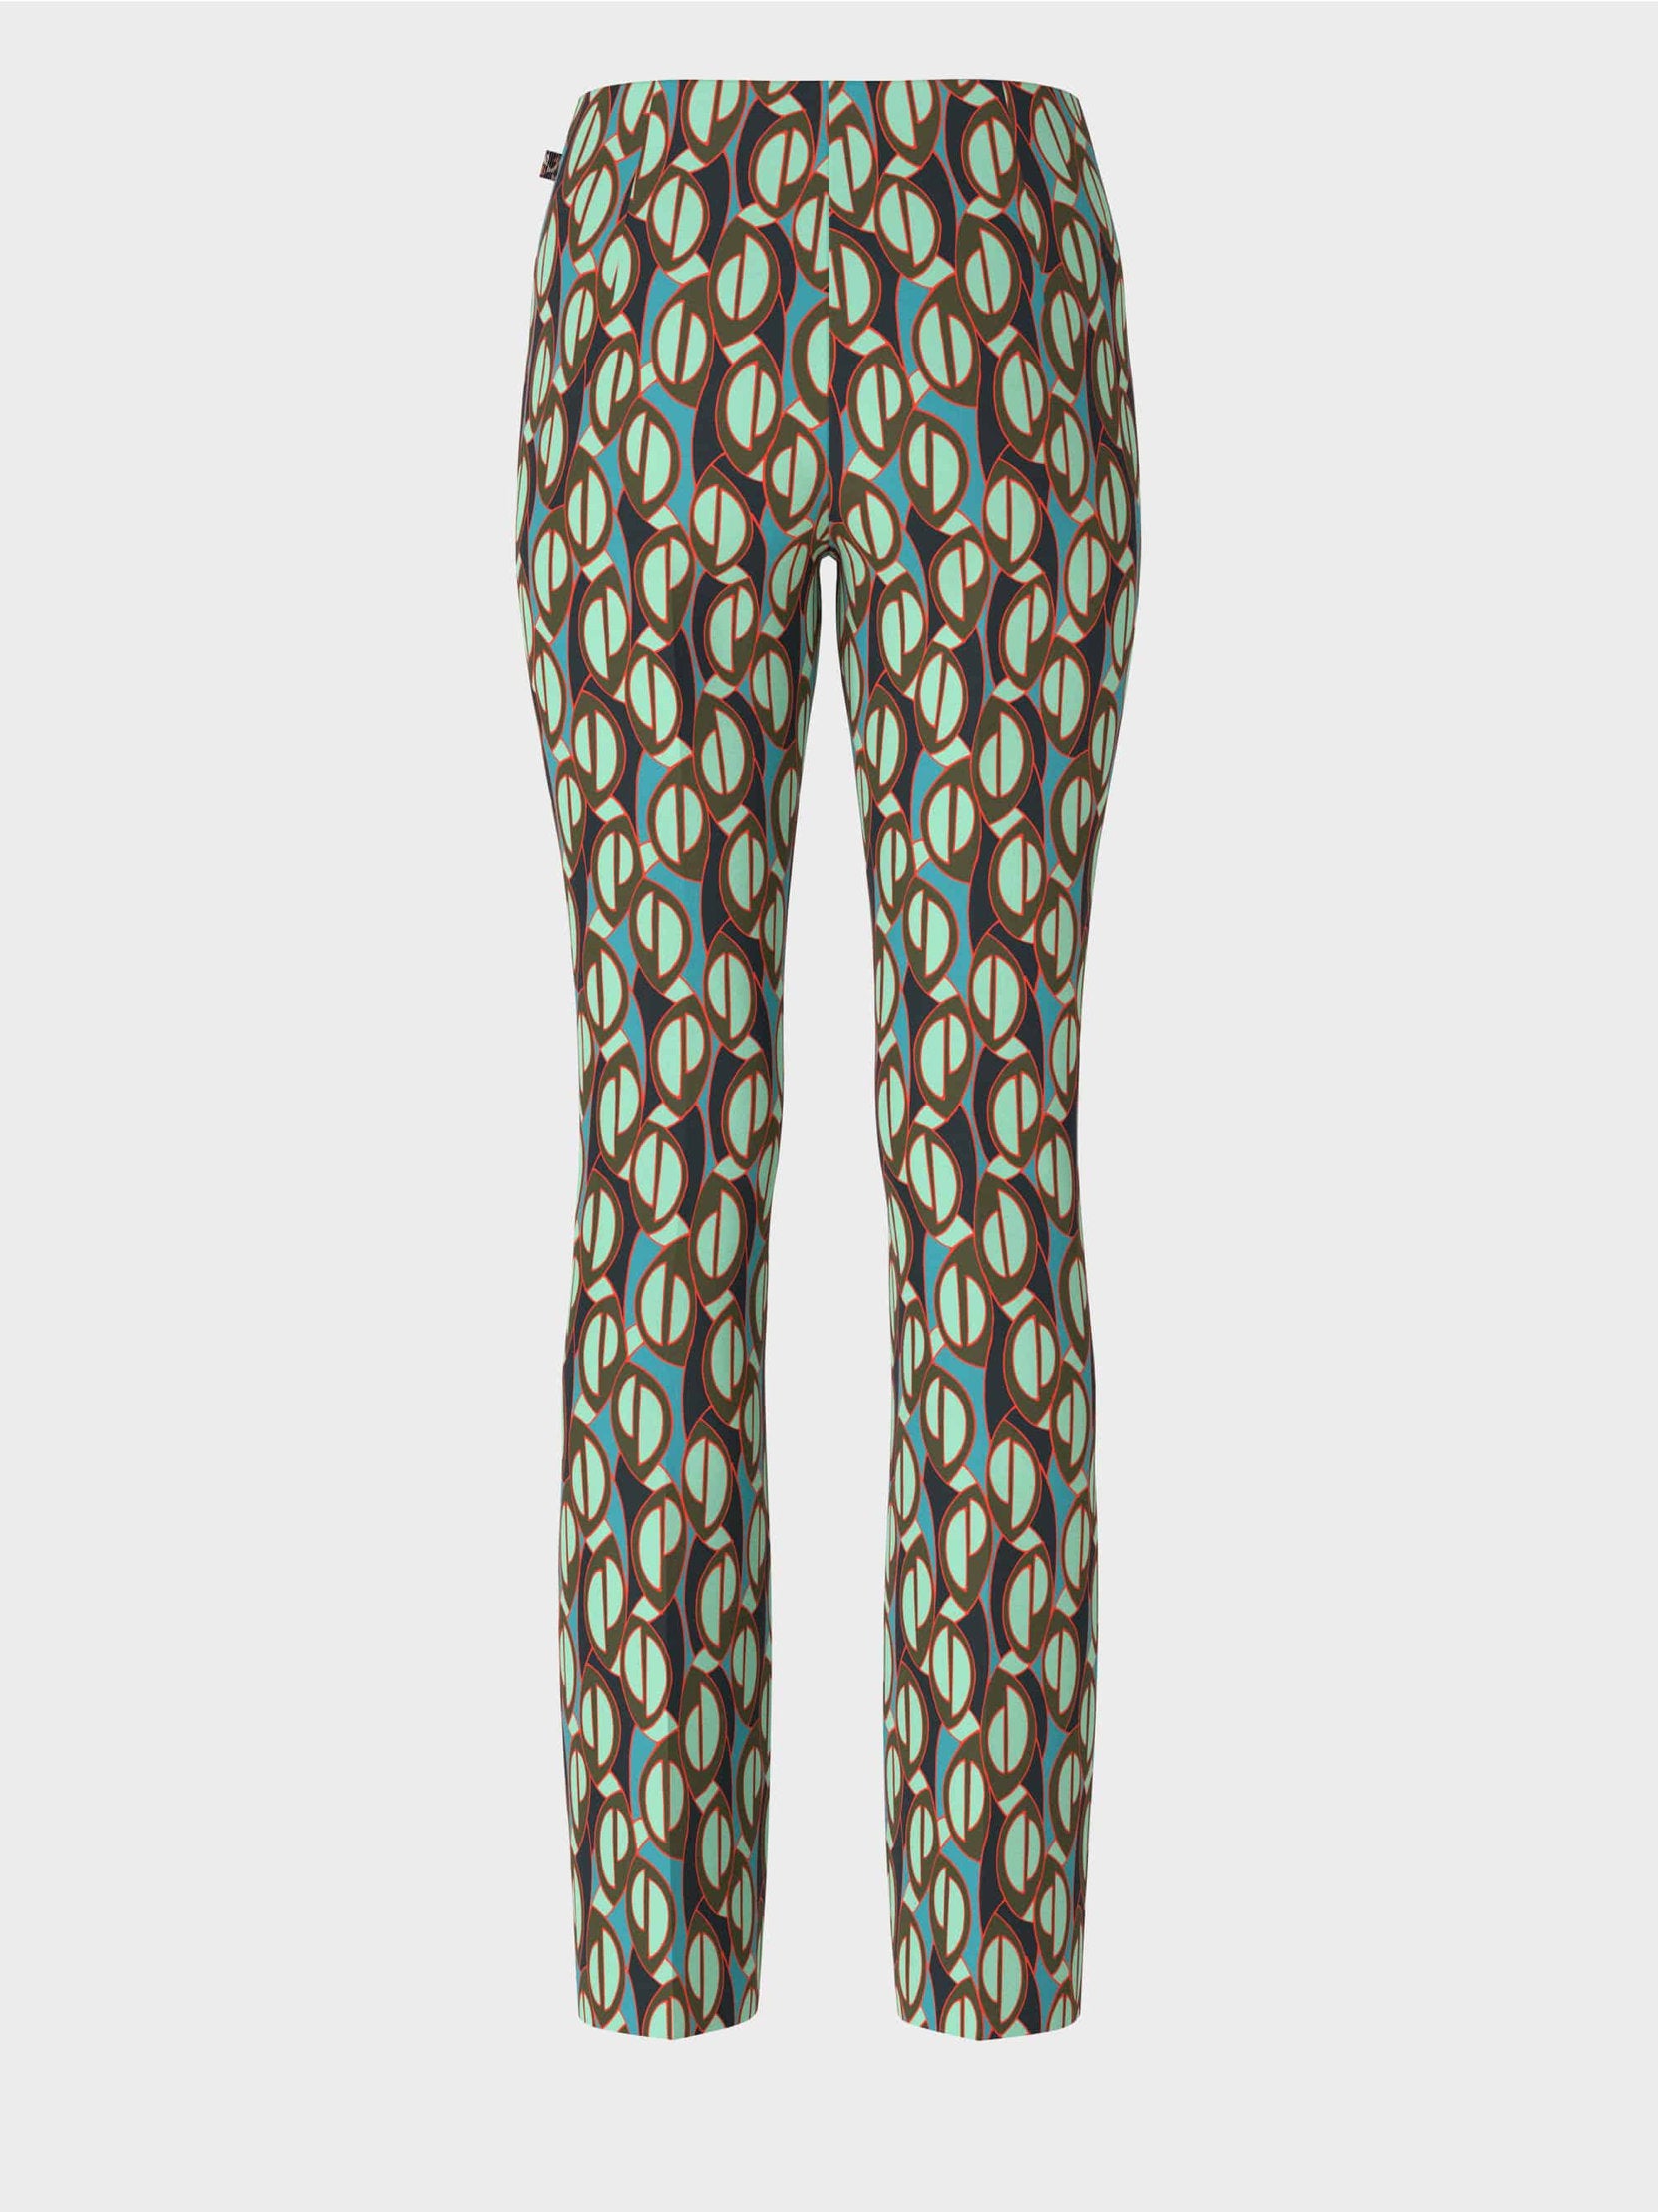 Frederica Pants With All-Over Print_WC 81.28 J01_562_09